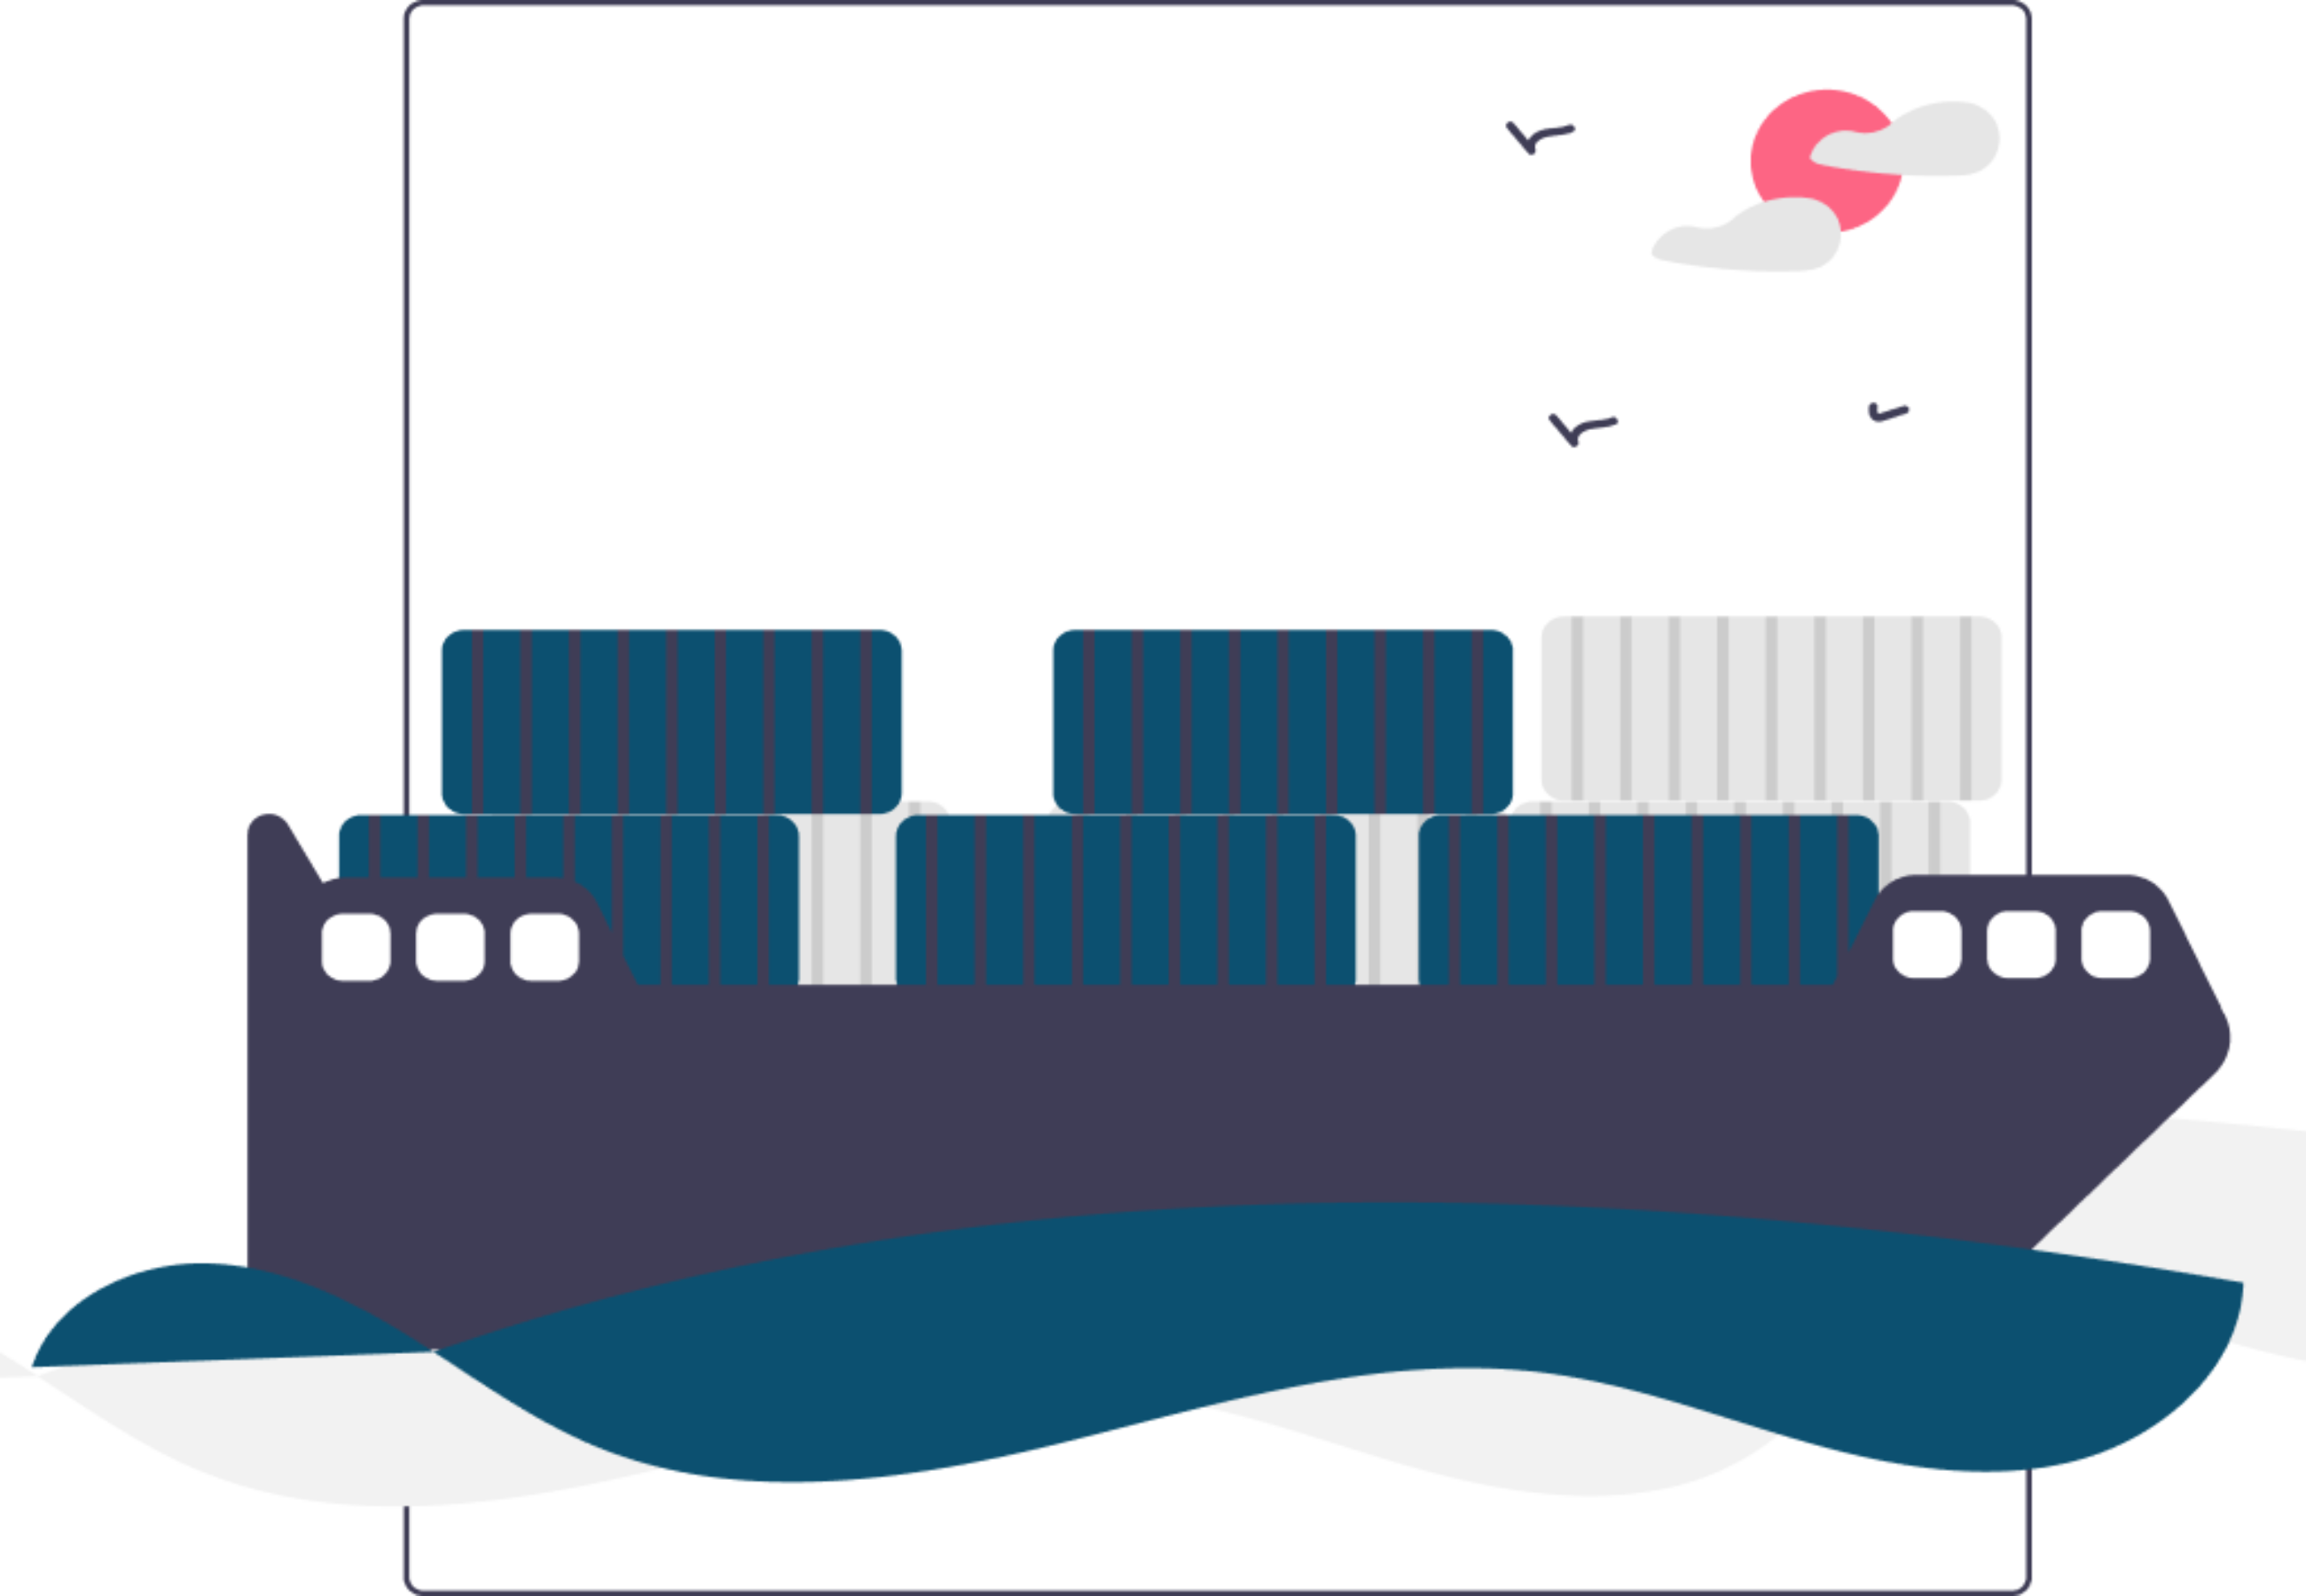 undraw_container_ship_re_alm4-1.png